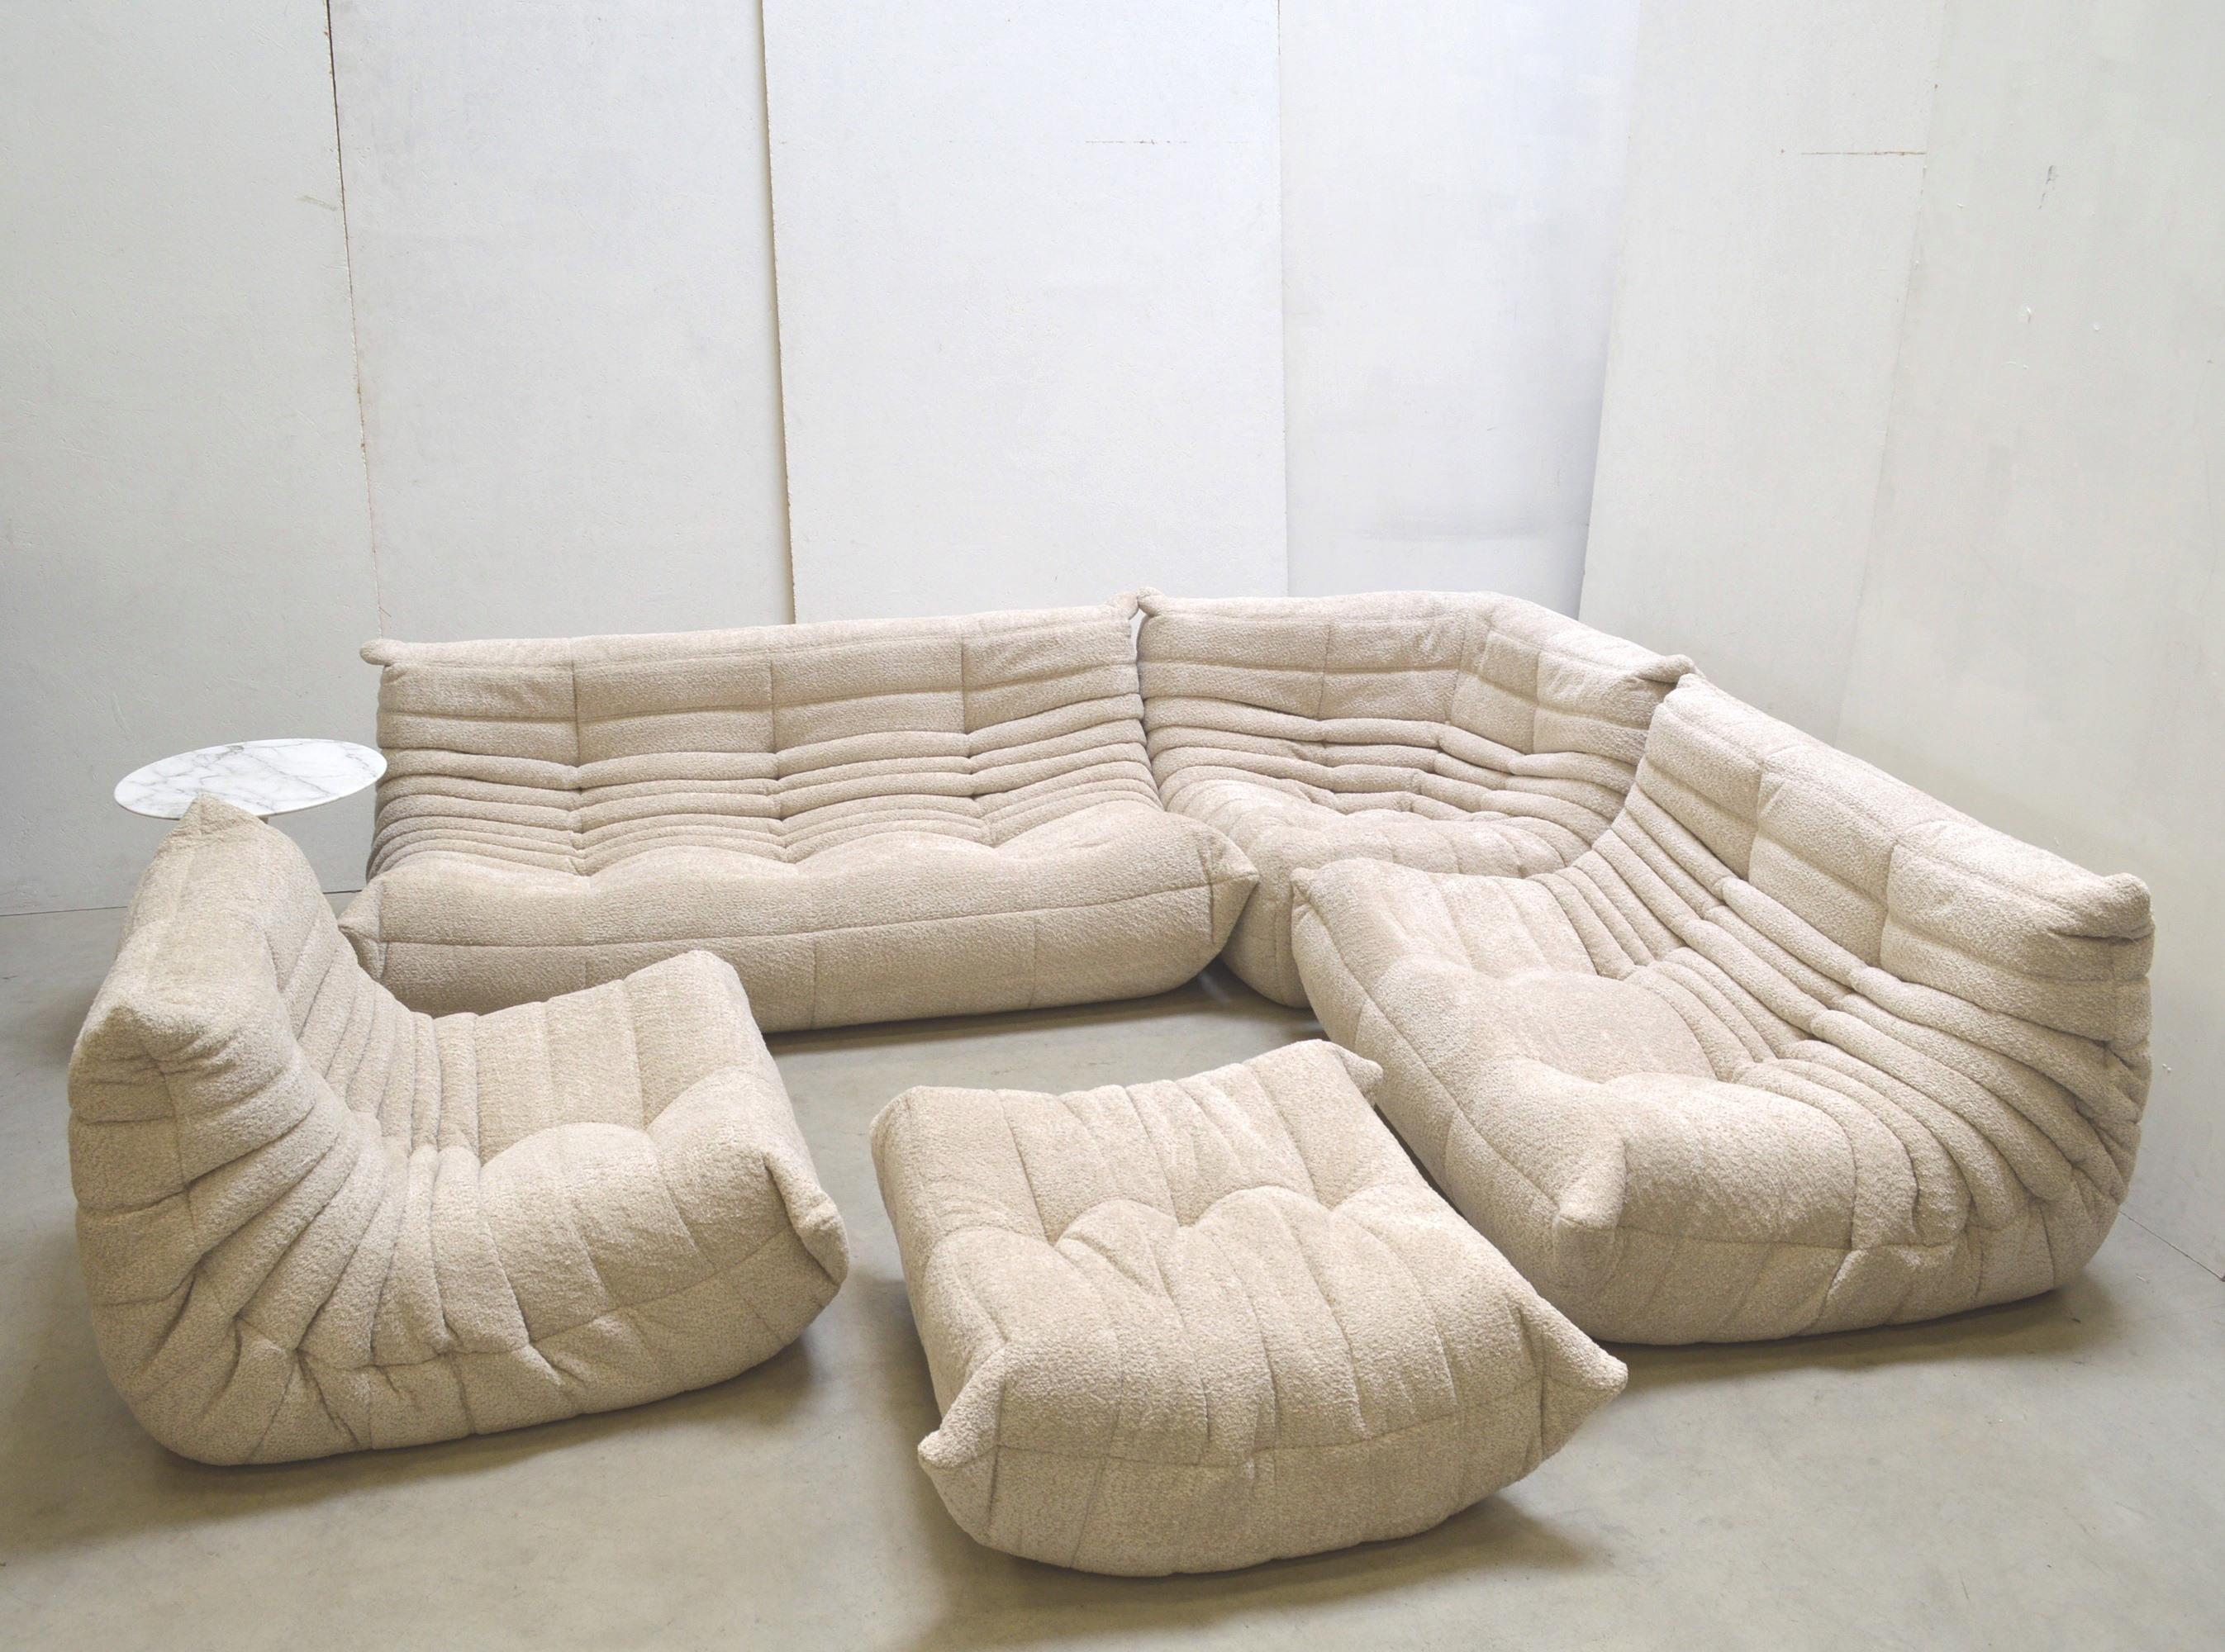 French Bouclé Edition Togo Seating Group Sofa by Michel Ducaroy for Ligne Roset 1973